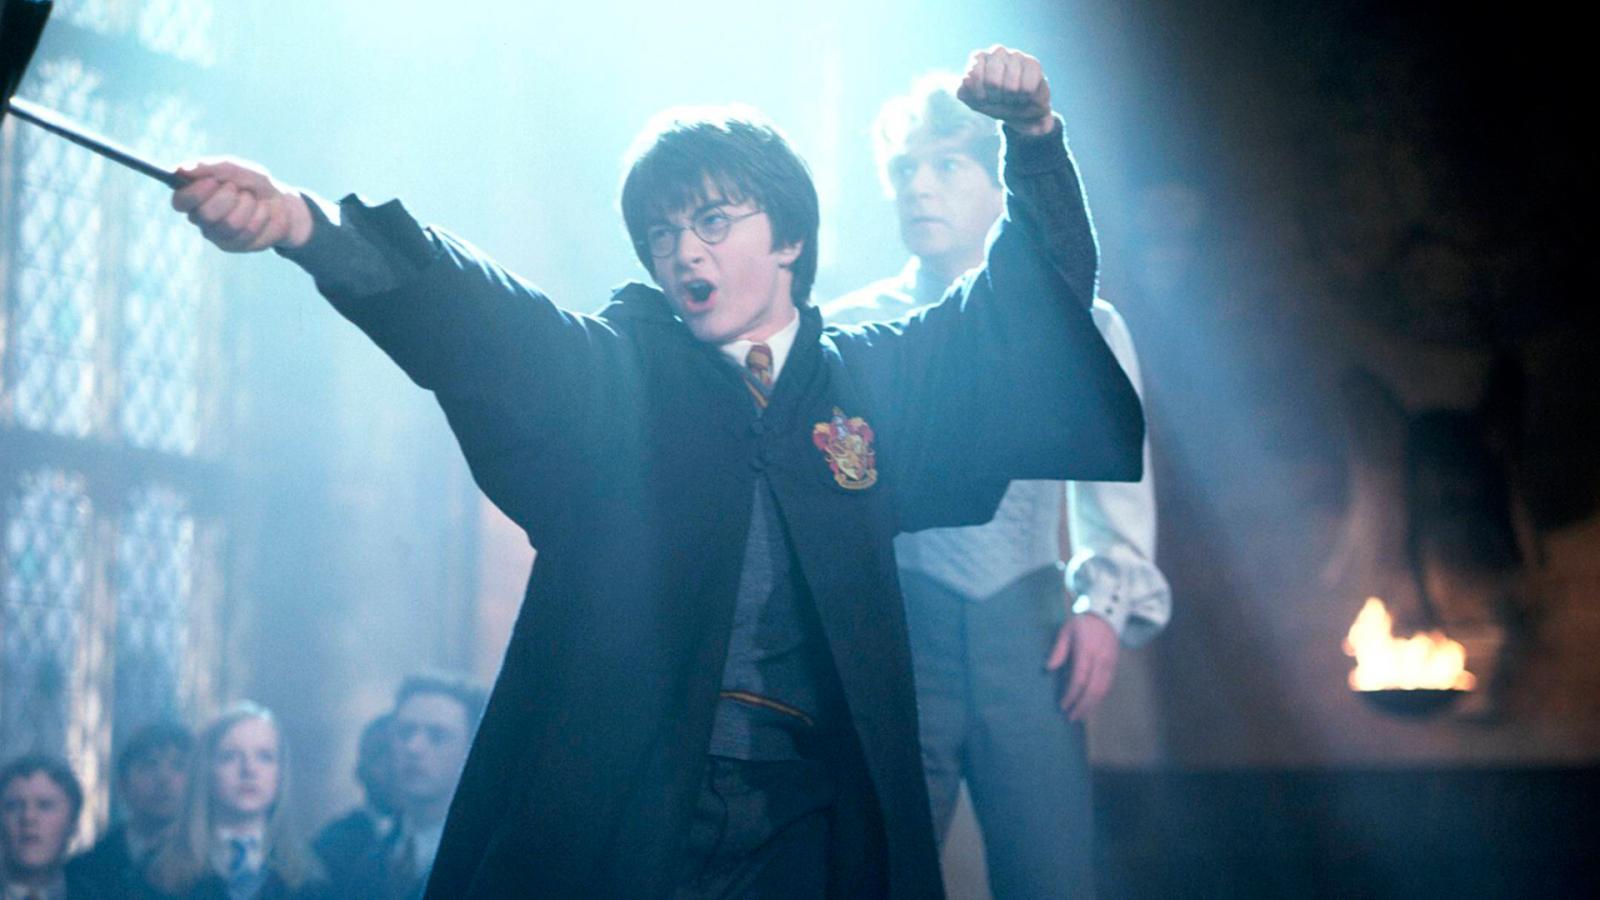 3 Badass Harry Potter Book Scenes That Would Make the Movies So Much Better - image 1